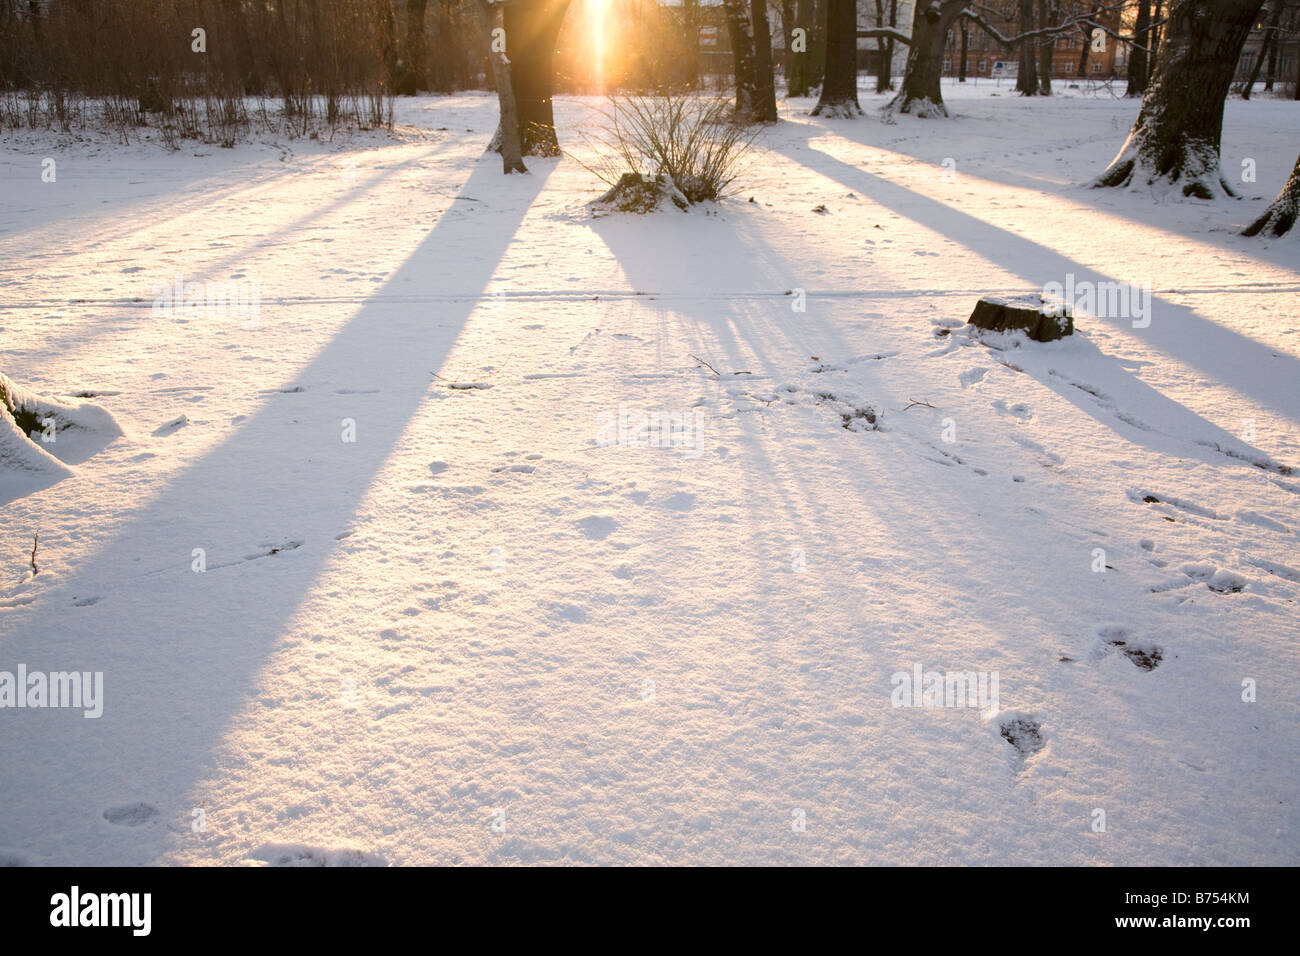 beams of light falling through a forest onto snow covered ground Stock Photo